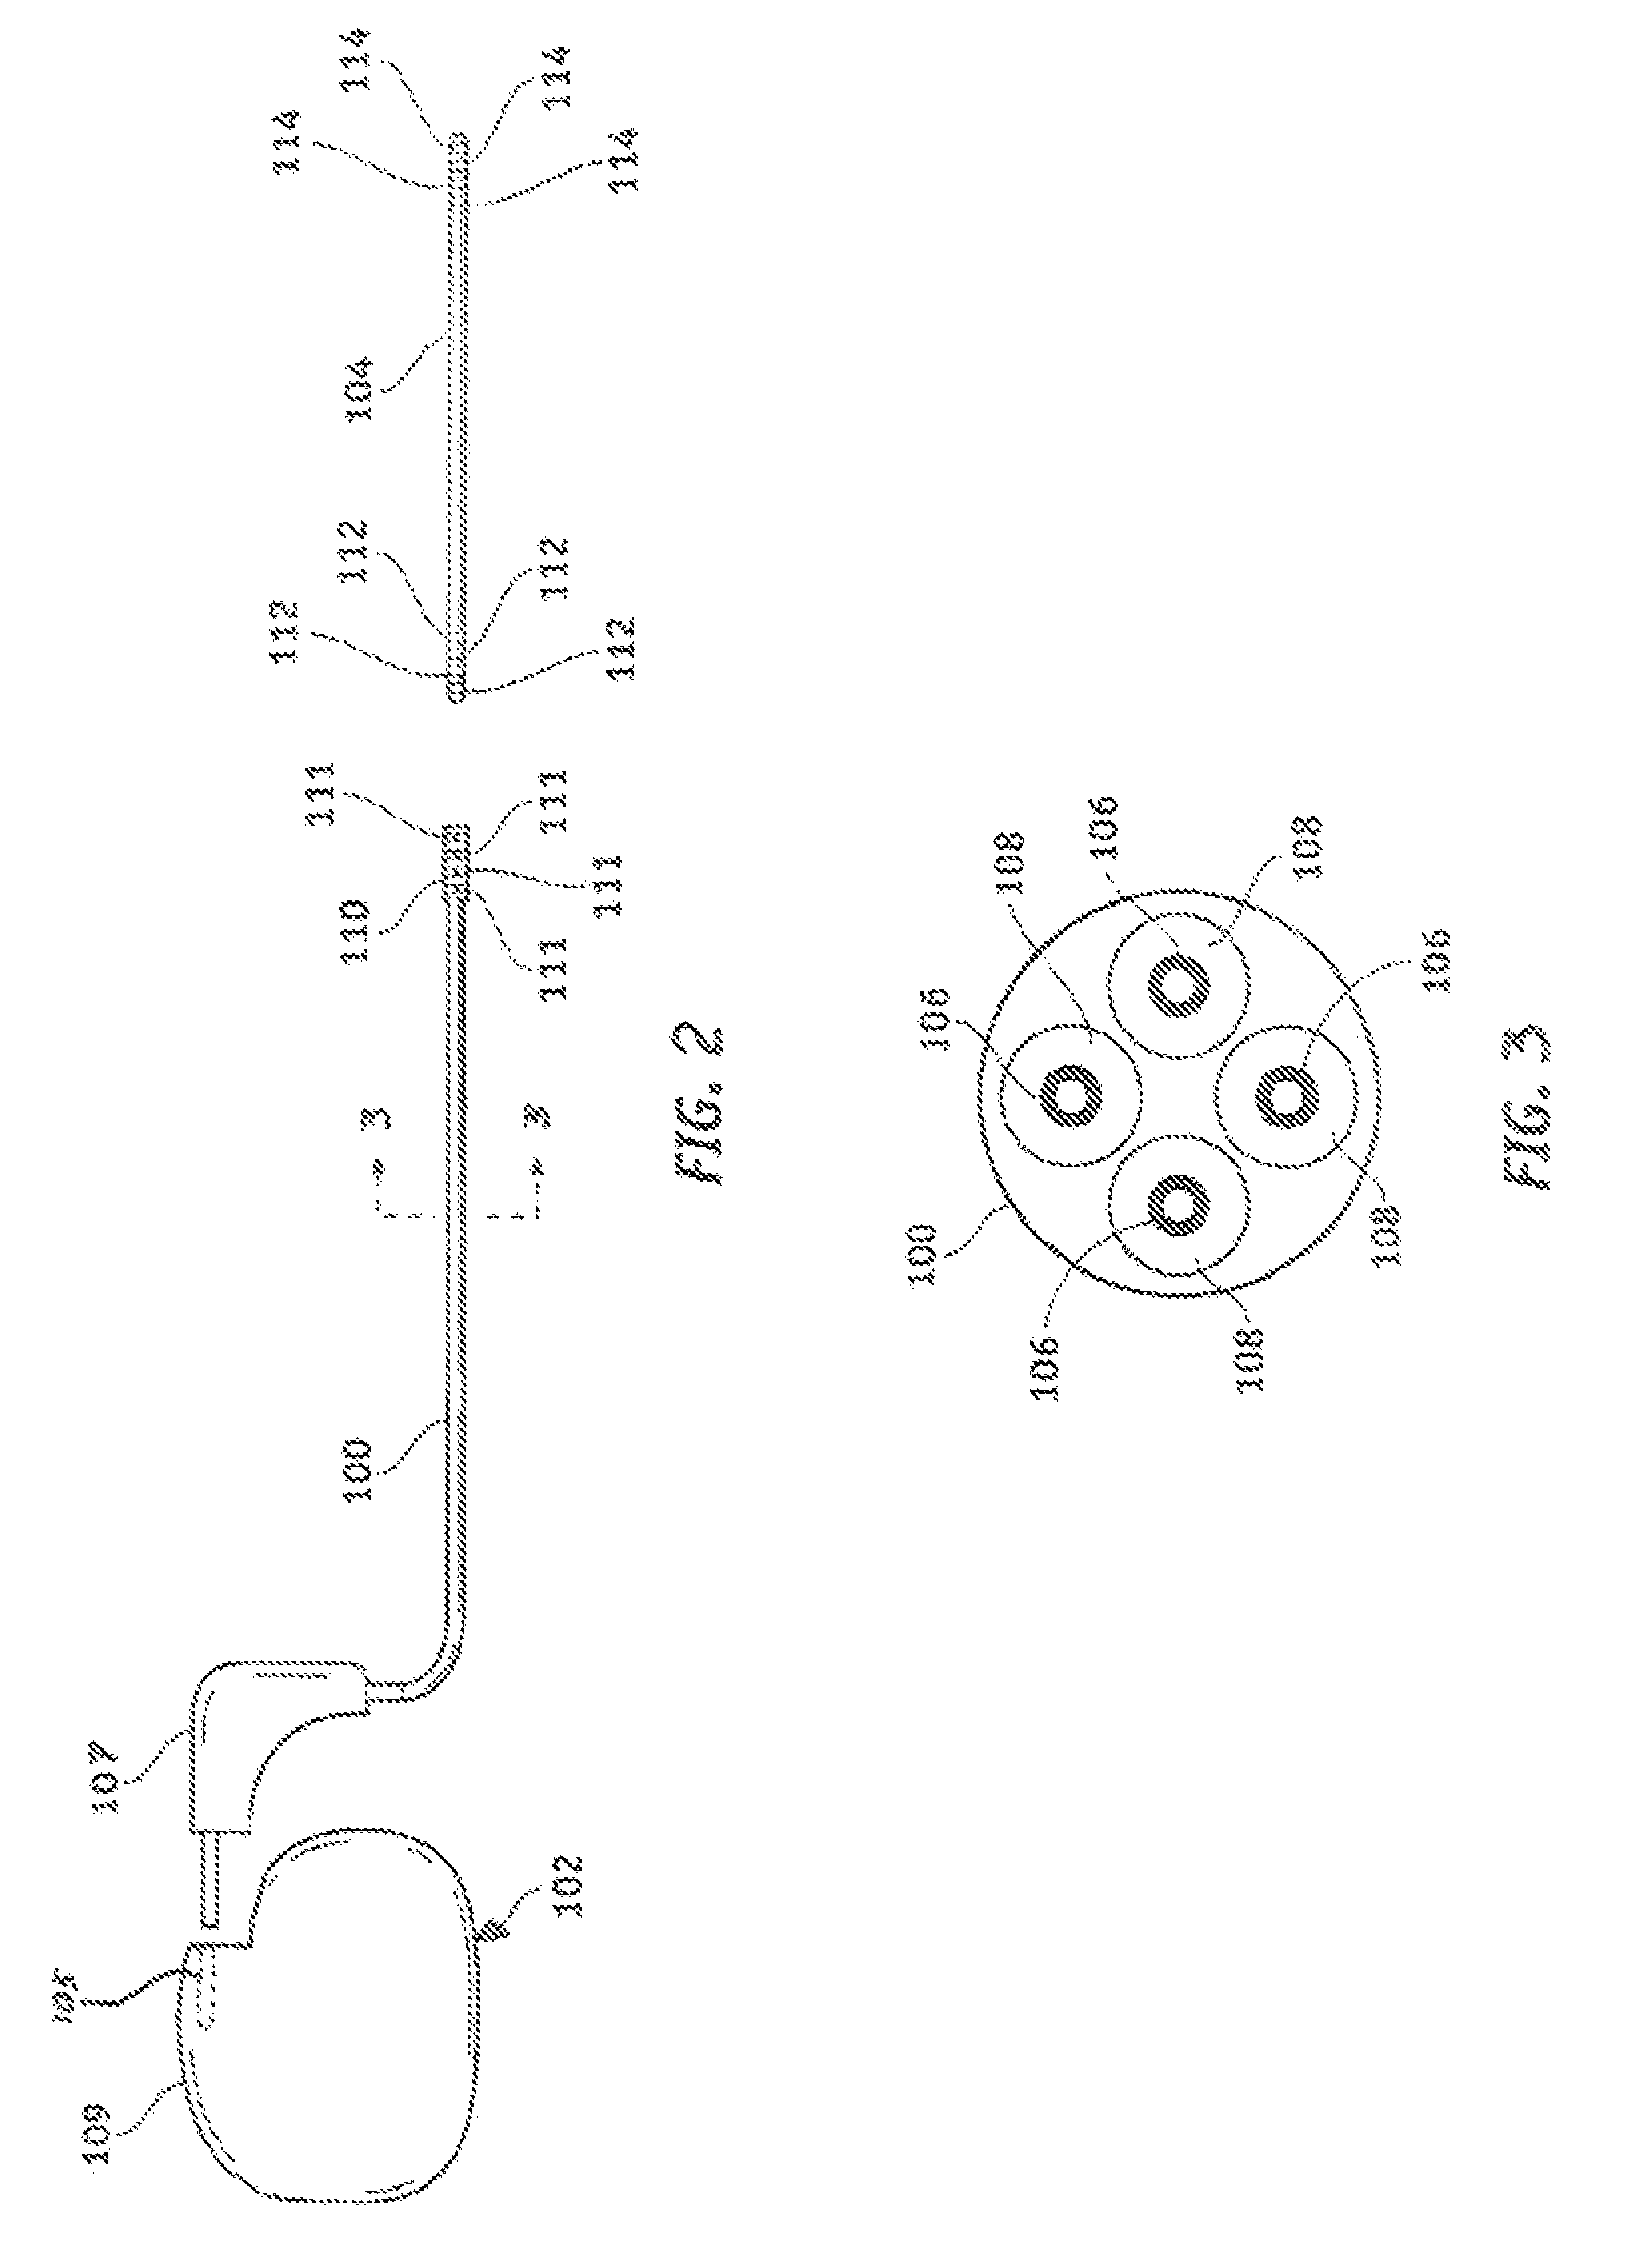 Internal hermetic lead connector for implantable device